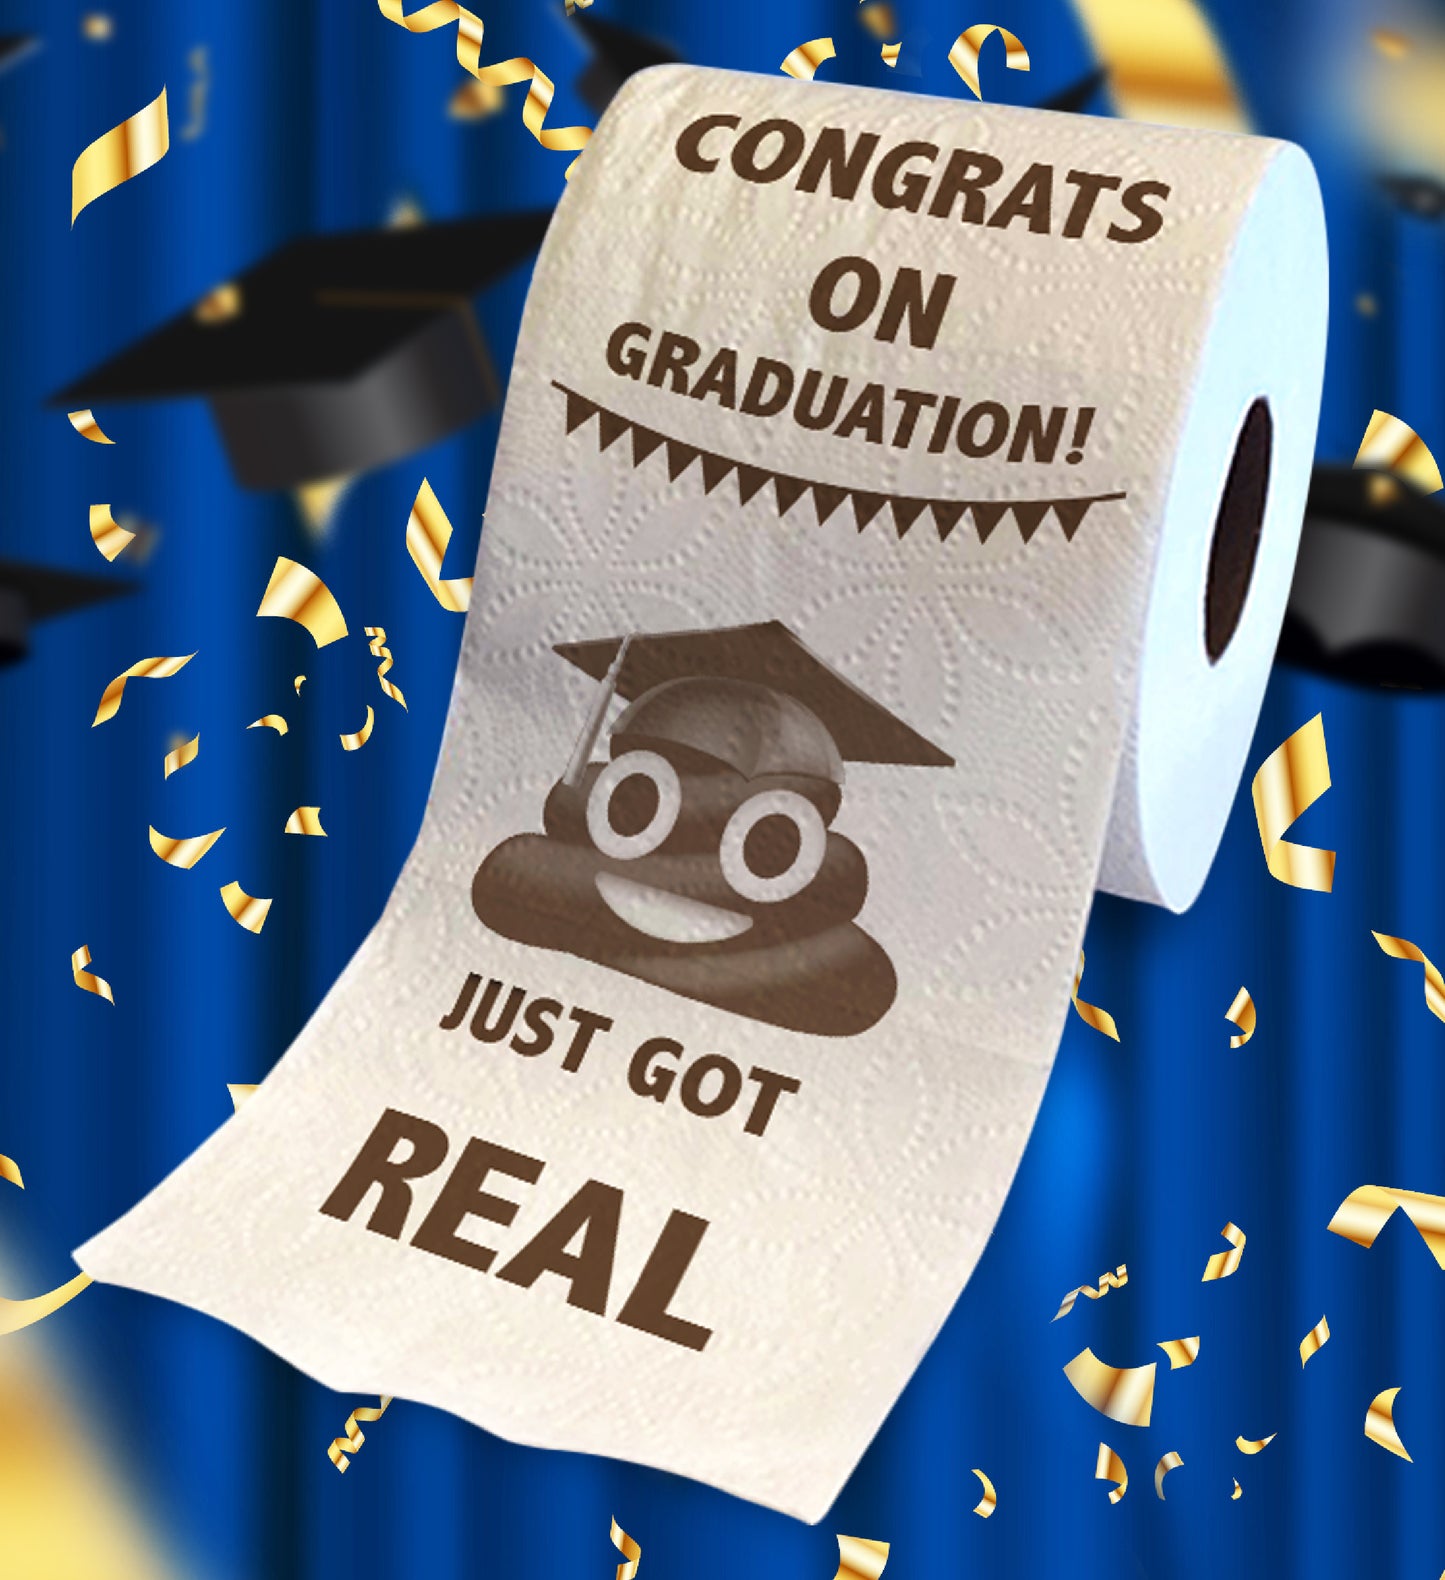 Printed TP Congrats on Graduation Toilet Paper Roll Prank Gag Gift for New Grad